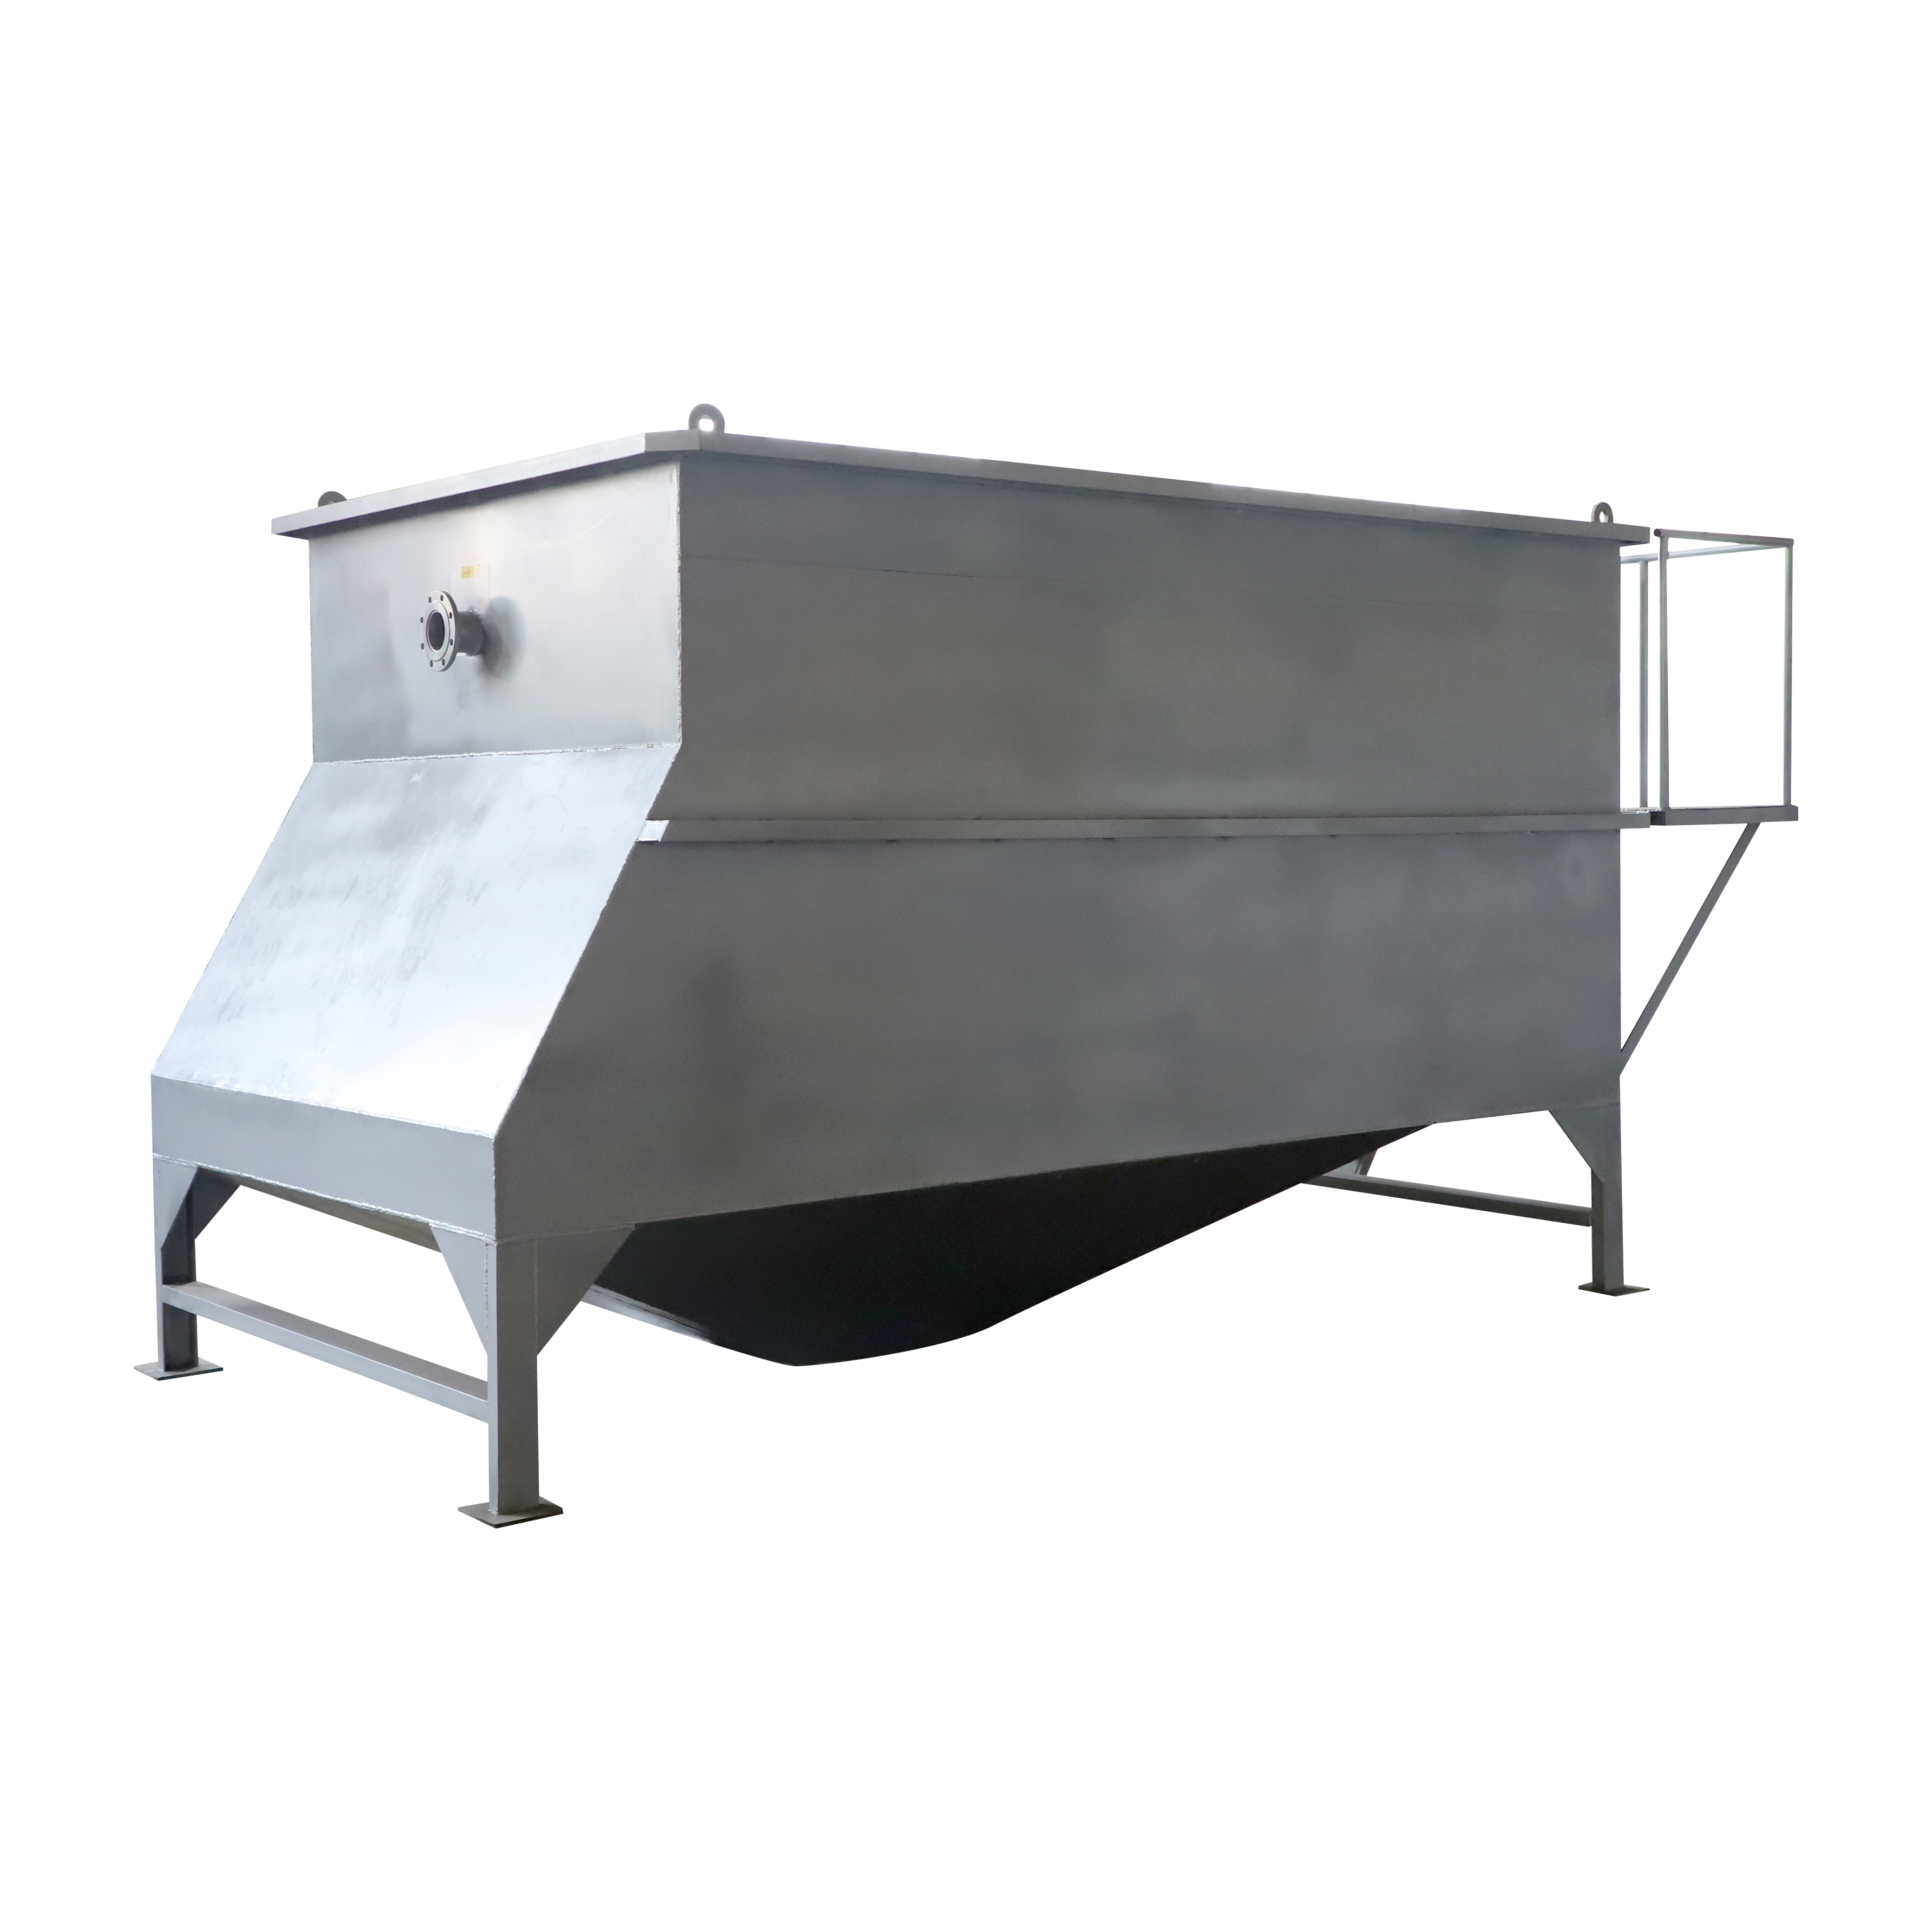 inclined plate clarifier for sale, inclined plate clarifier plant, slant plate clarifier